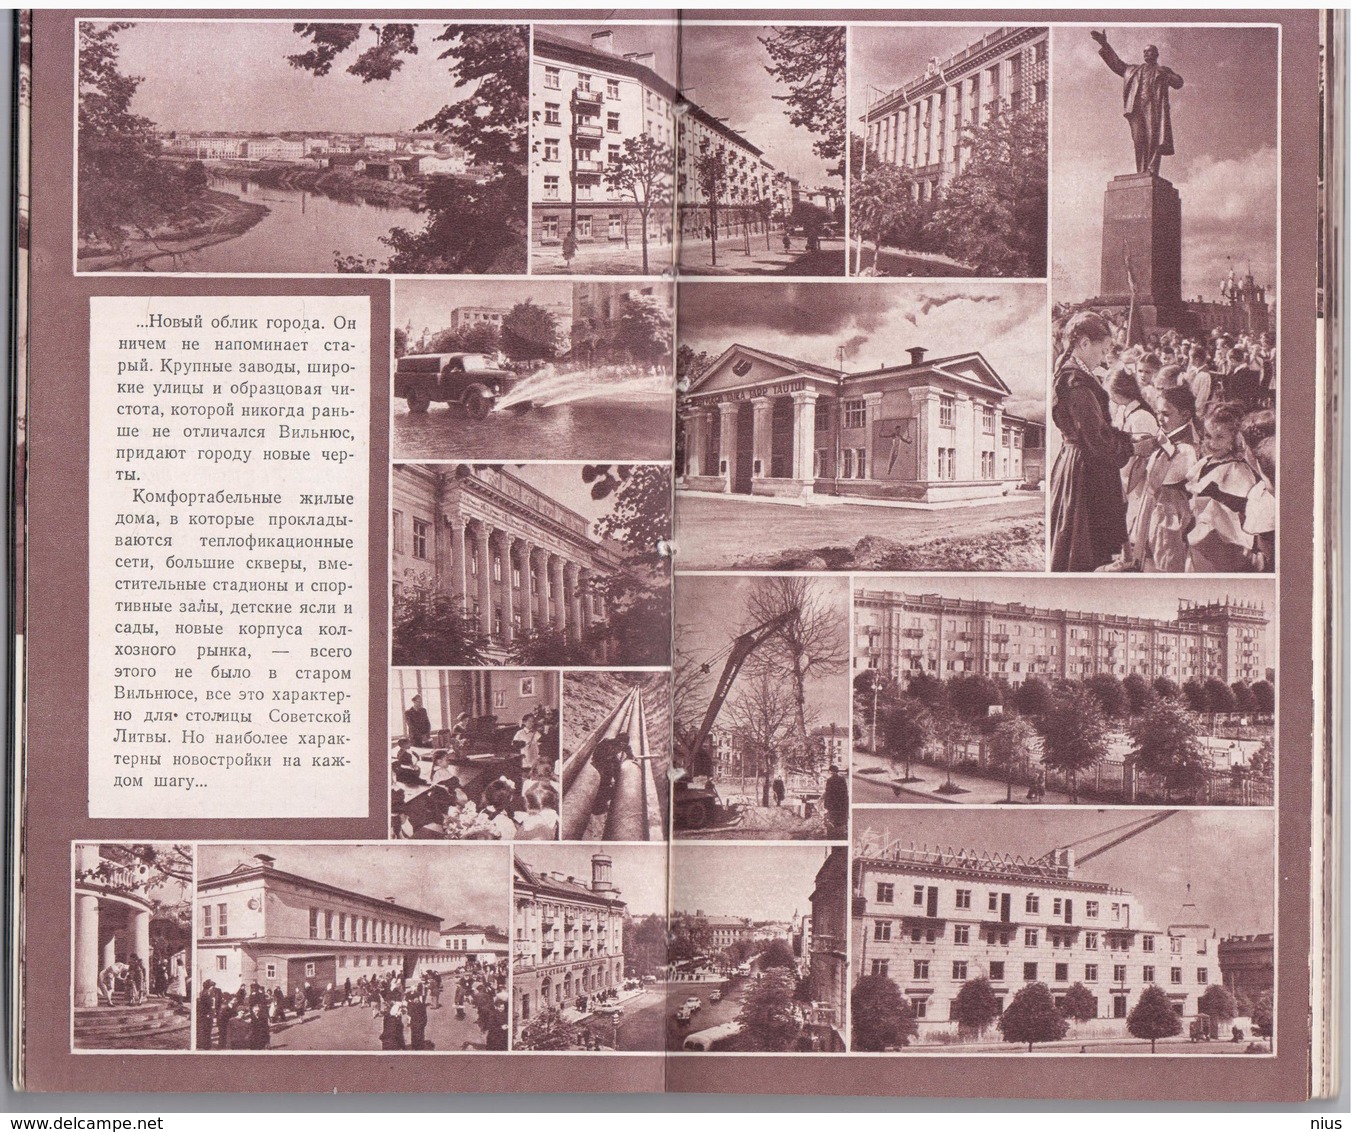 Lithuania Lietuva 1957 100 Pages, Circulation 10 000, Map, A Lot Of Pictures, History, Information, Good Condition - Lingue Slave